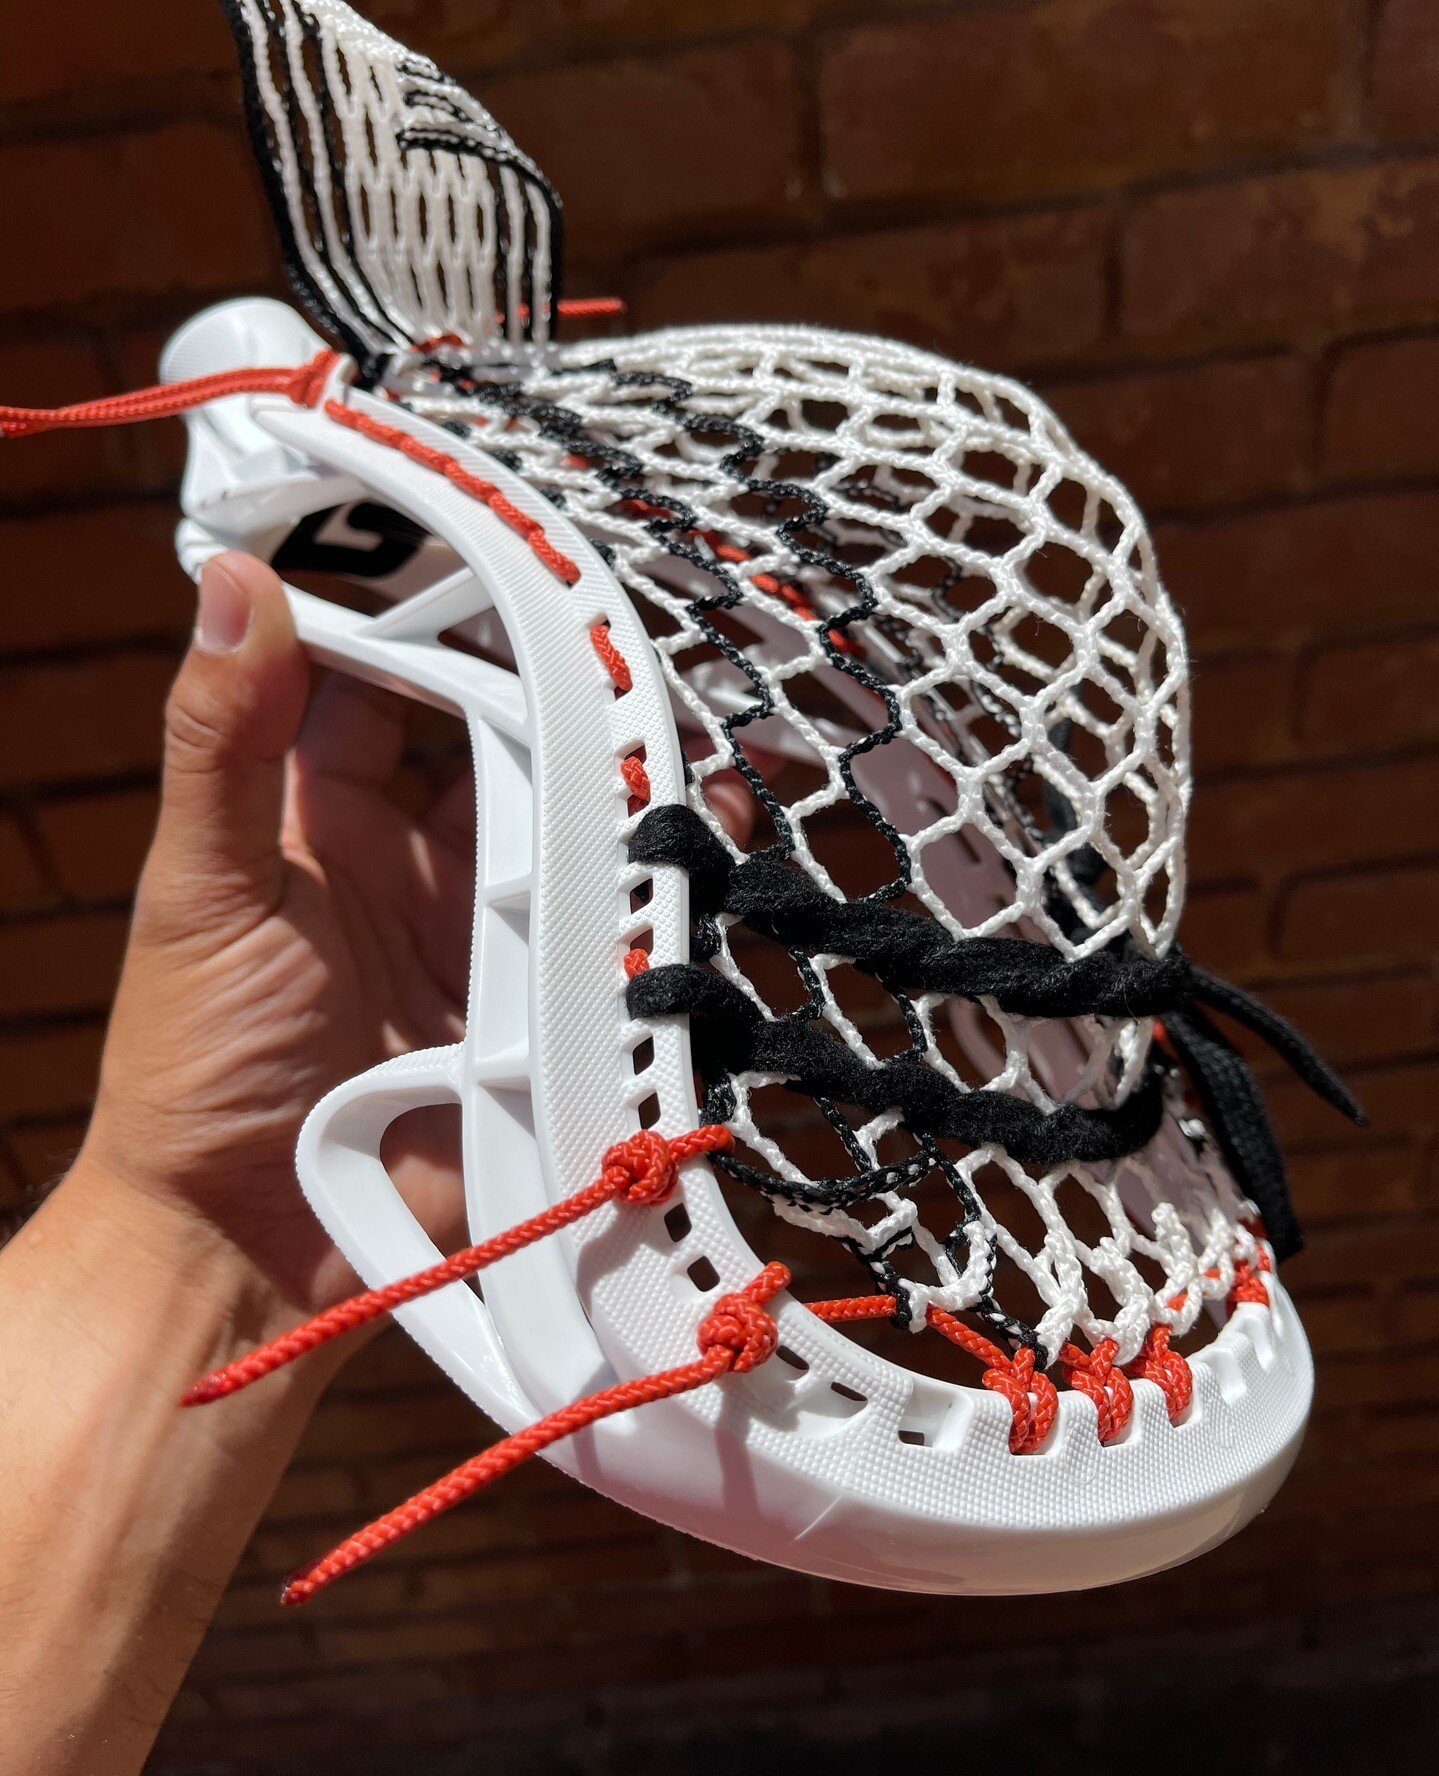 The @gaitlaxofficial D is here to stay 👏🏽👏🏽 This one's headed out to Alabama ⁠
⁠
#nsalacrosse #nsalax #nsastrung #customstrung #norcallax #bayarealax #lax #lacrosse #laxstick #lacrossestick  #lacrosselife #laxislife #laxhead  #lacrosseplayer #lac